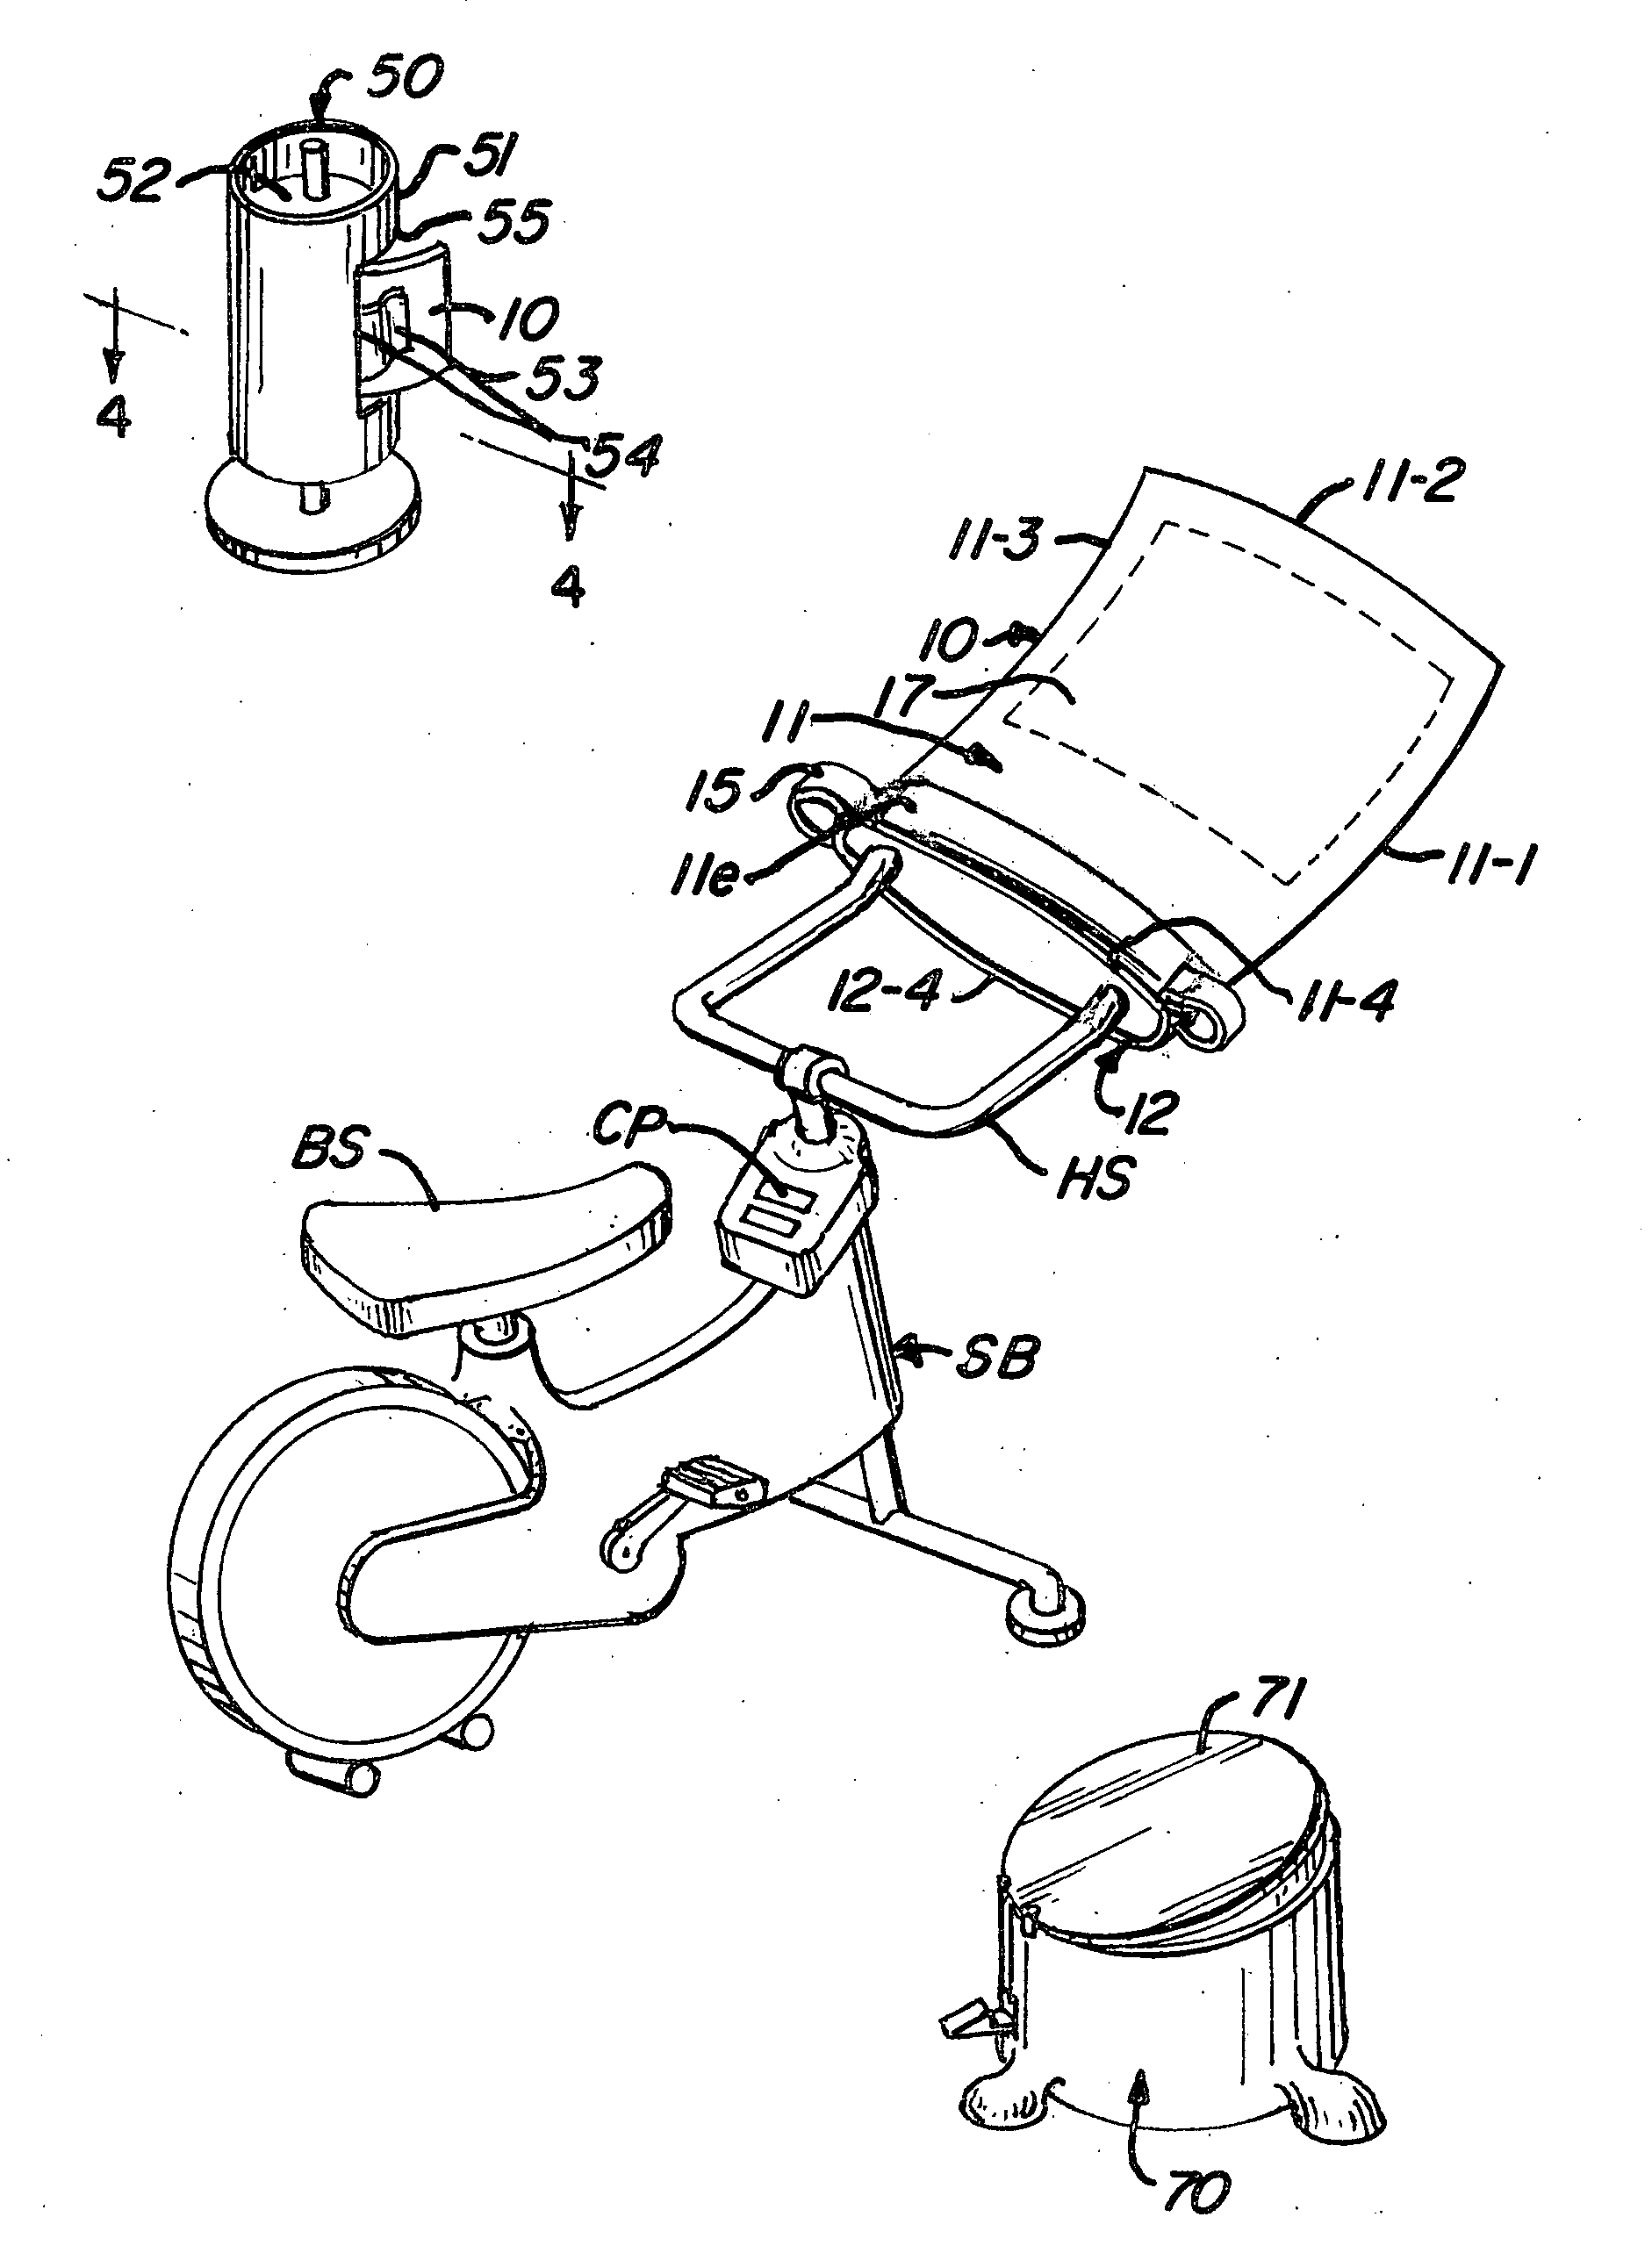 Method and apparatus for providing sanitary shields for exercise devices